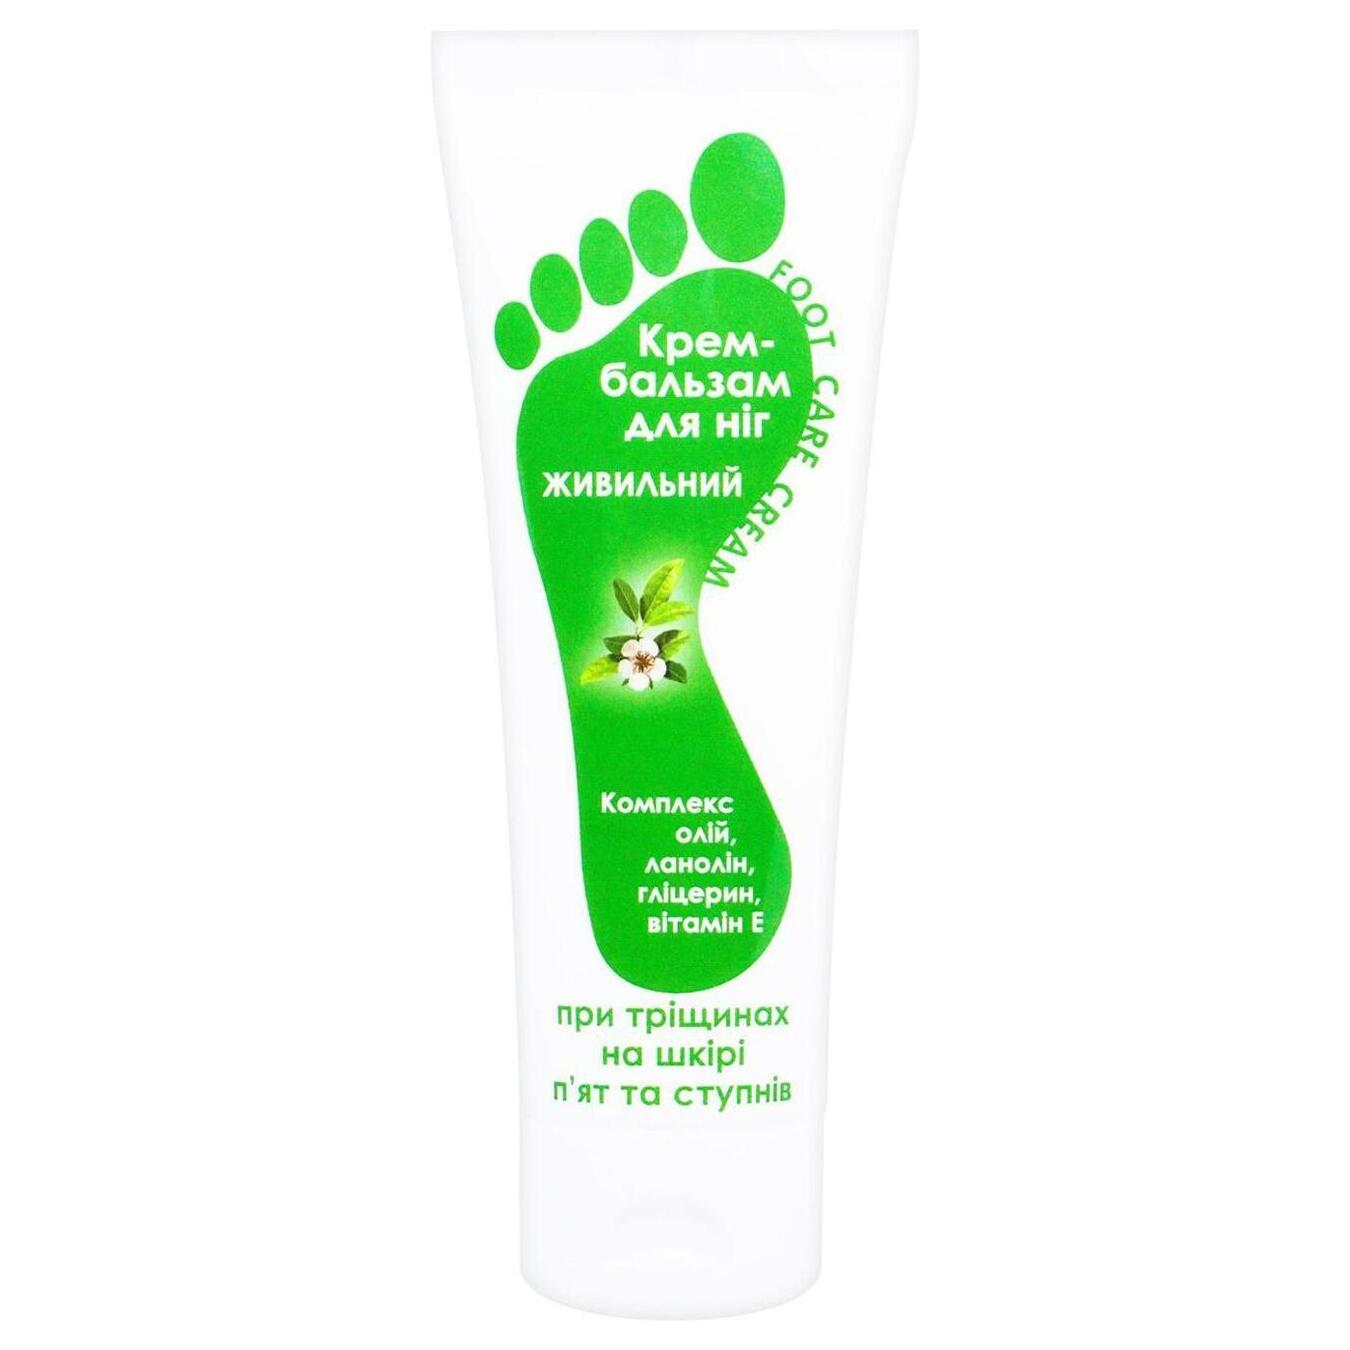 Cream-balm Foot aroma is nourishing for cracks on the skin of the heels and feet 70g